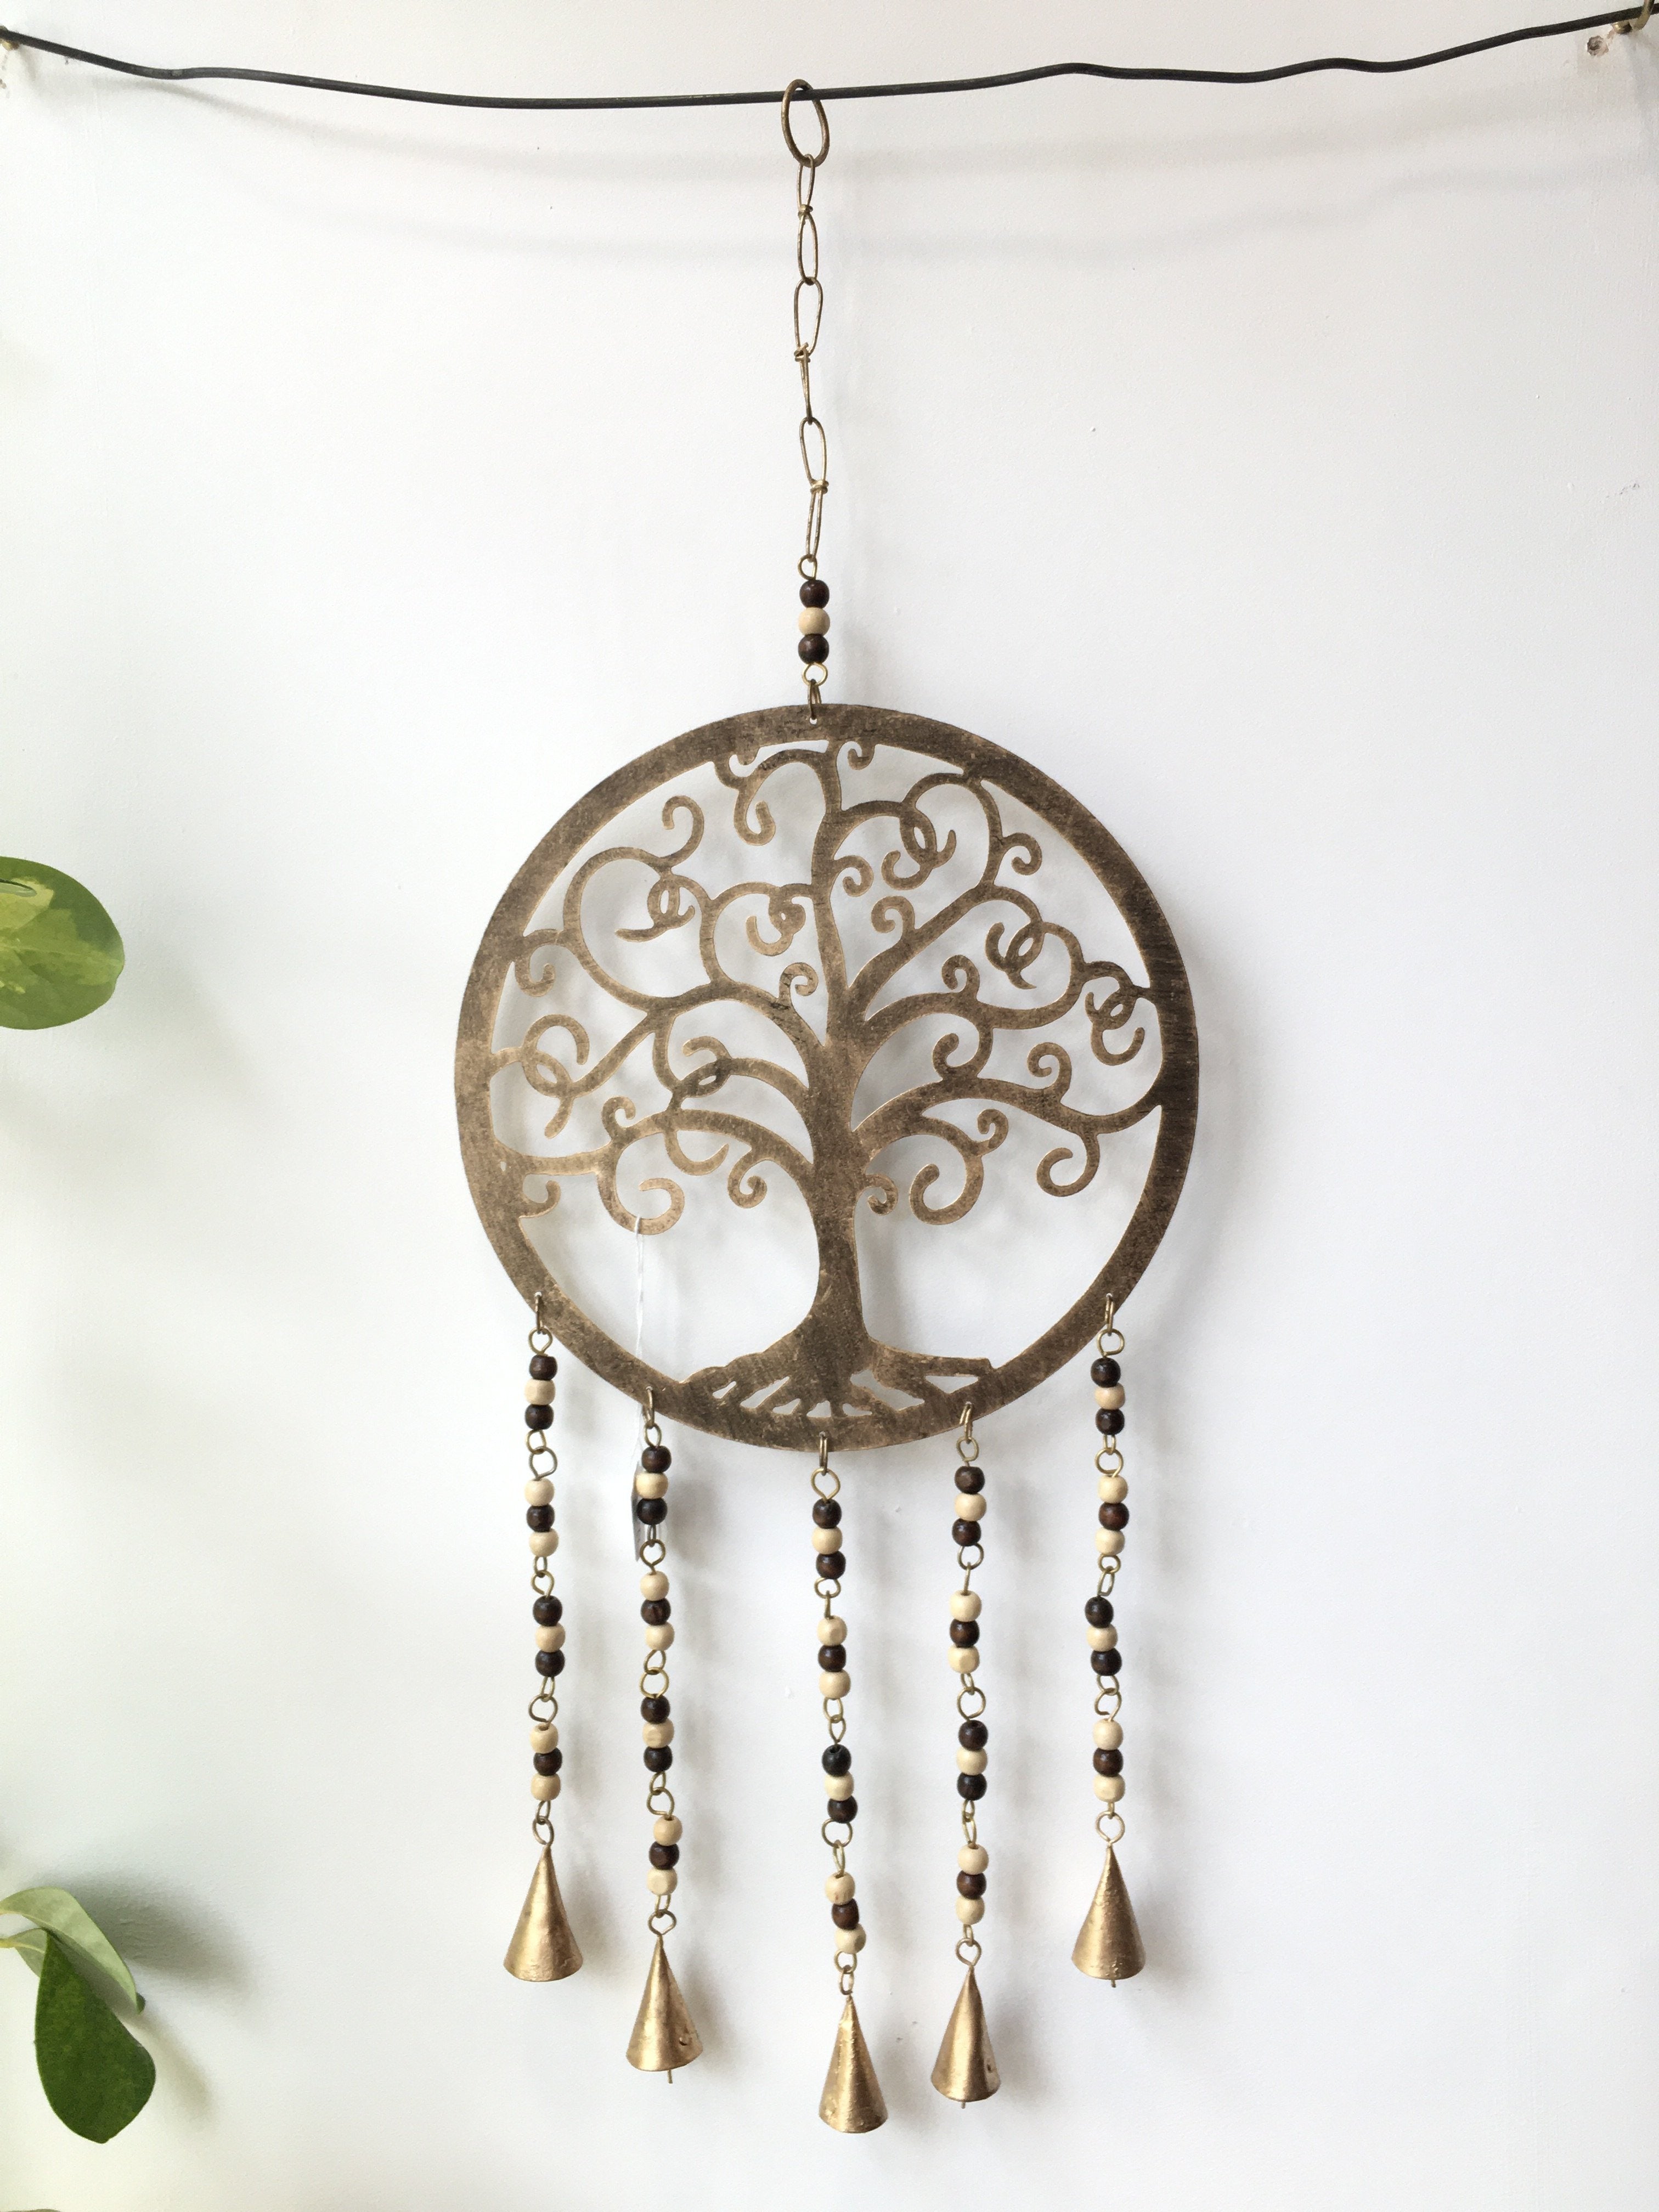 LARGE METAL Tree of Life WIND CHIME